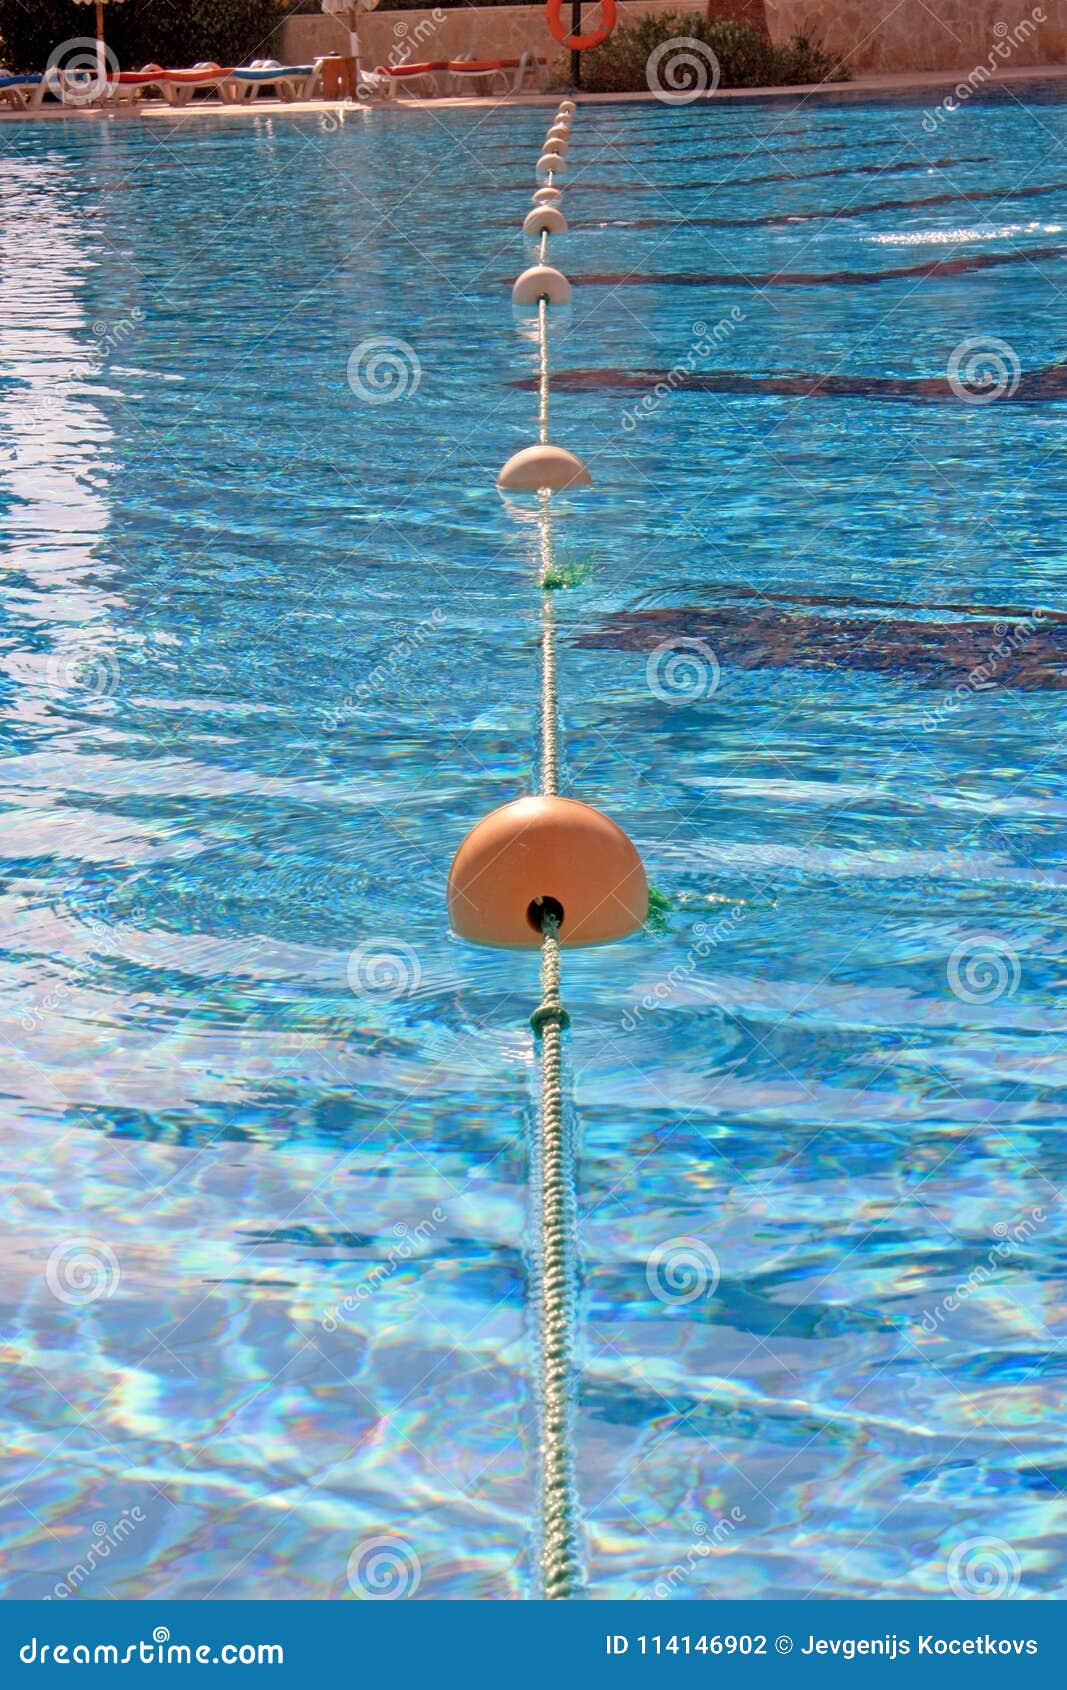 https://thumbs.dreamstime.com/z/rope-floats-lies-pool-clear-water-rope-floats-lies-pool-clear-water-sunny-day-outdoor-114146902.jpg